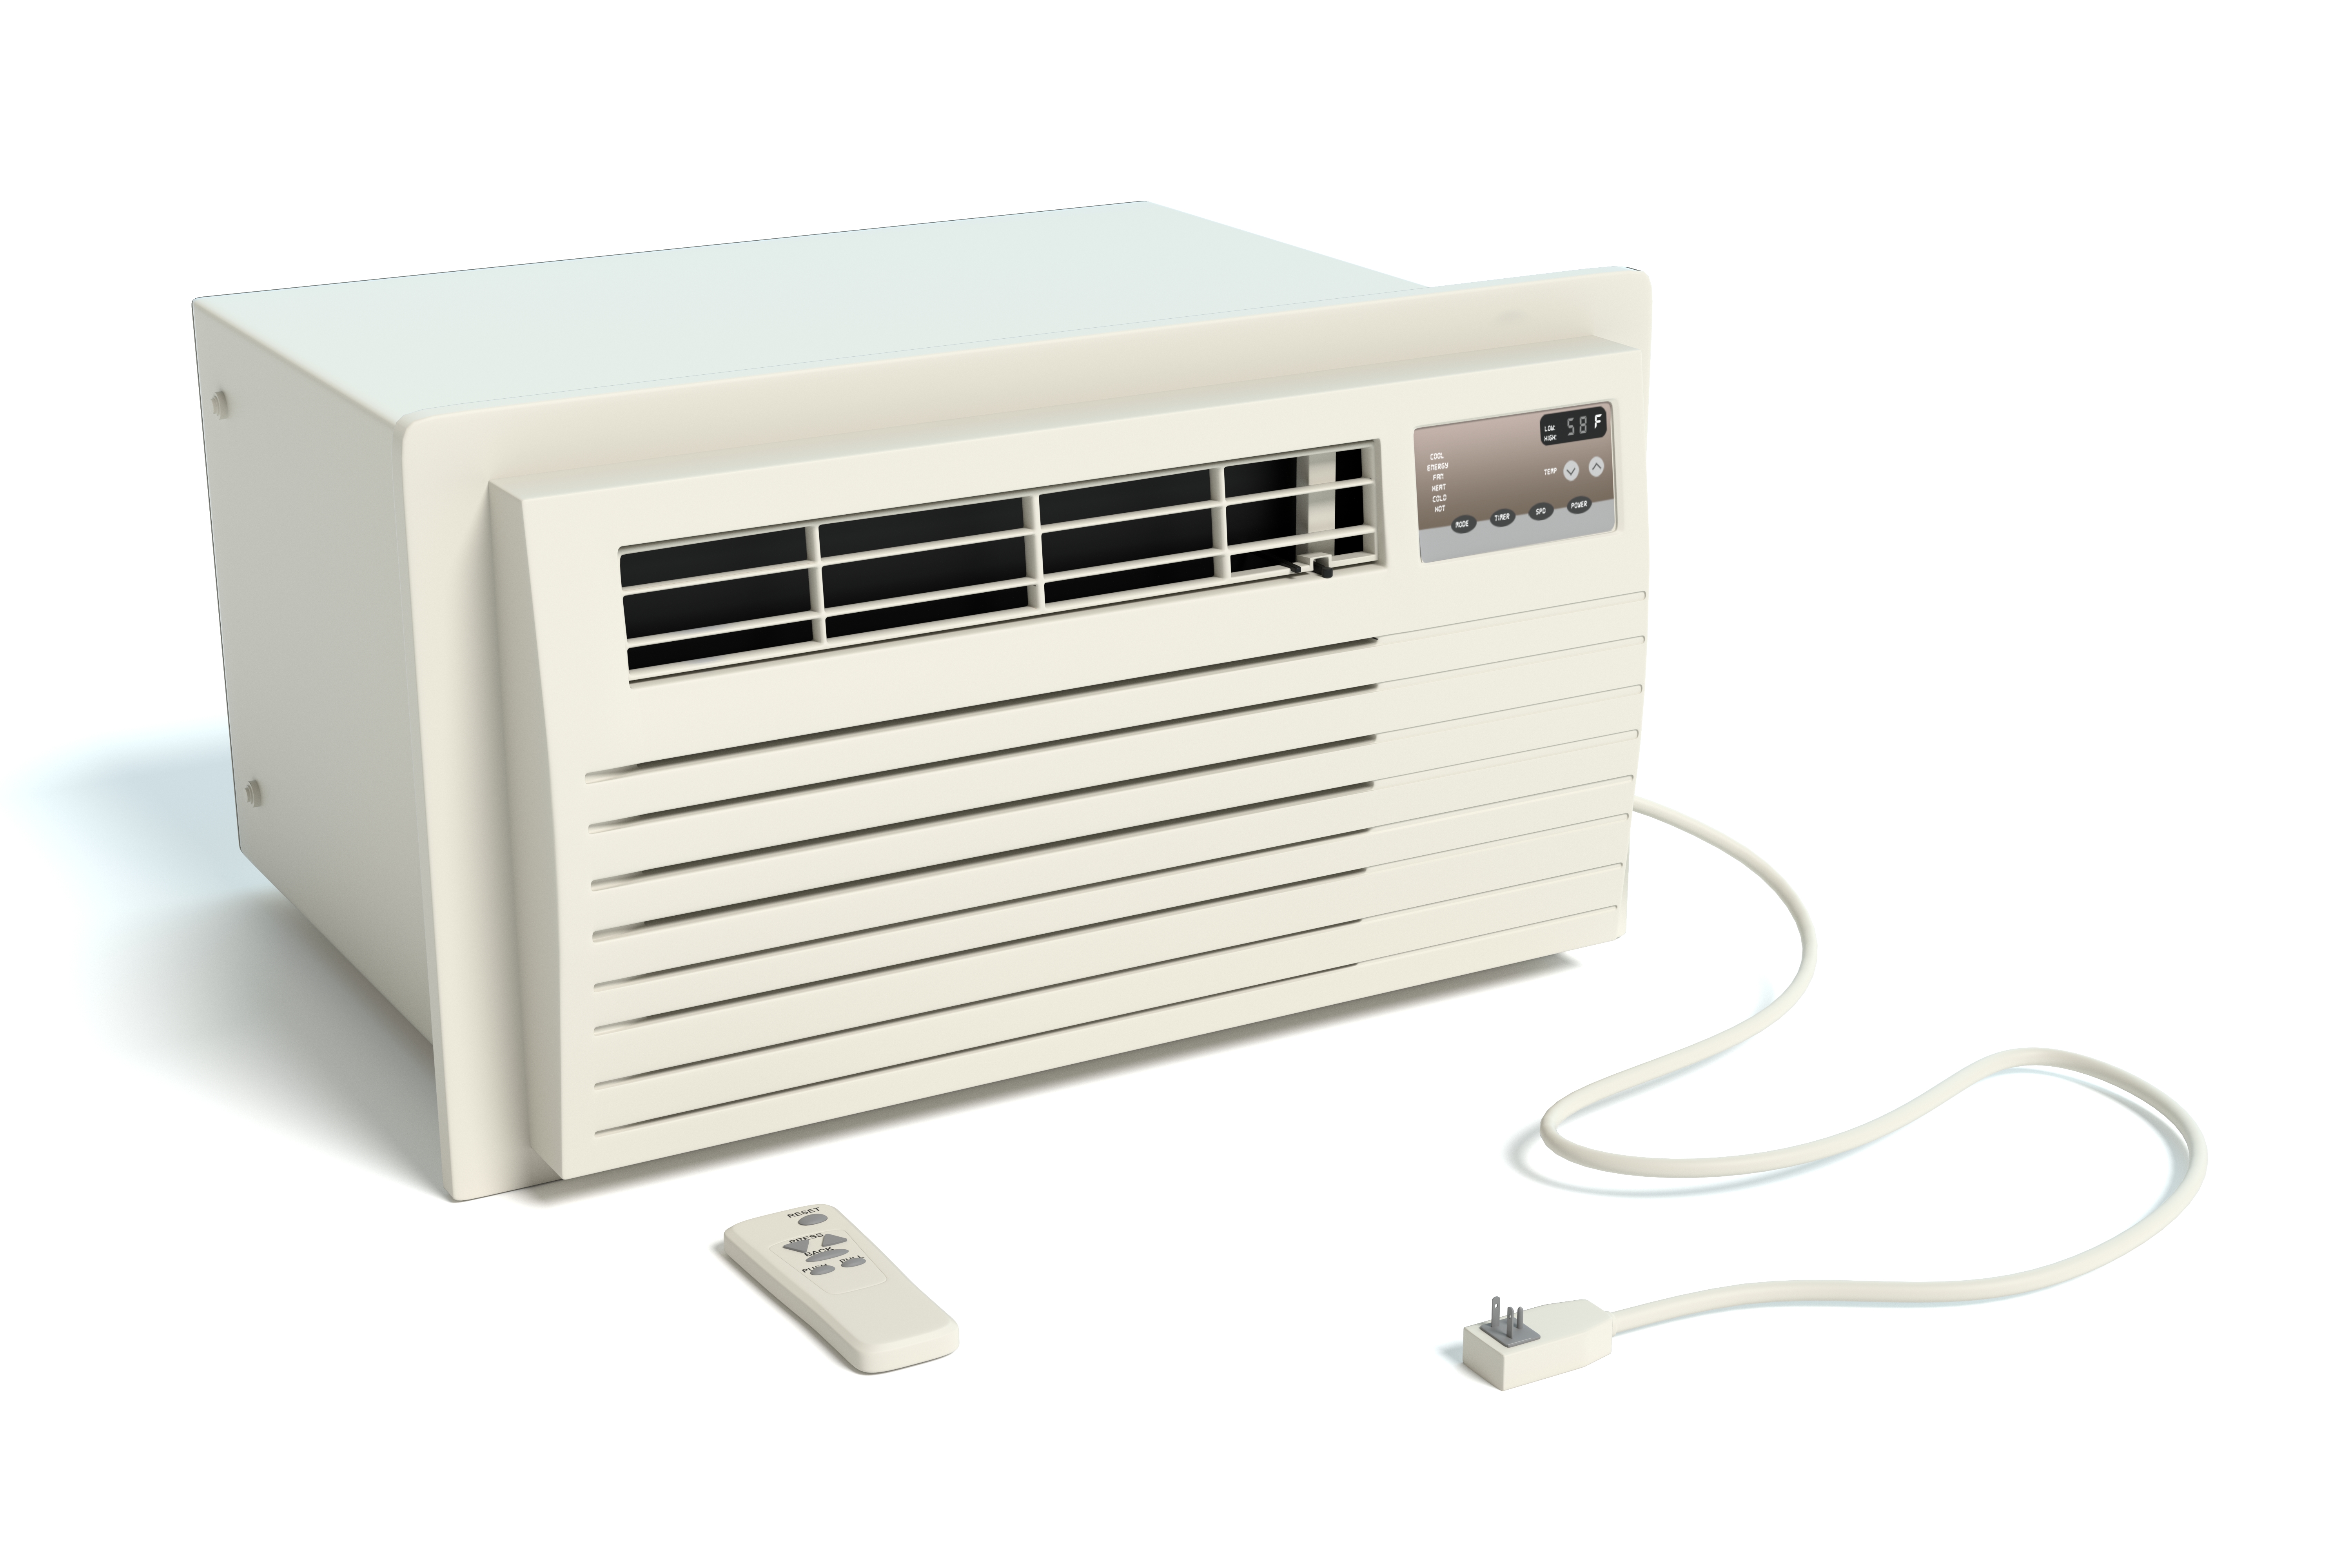 electrical - Are power outlets for window A/C units likely to